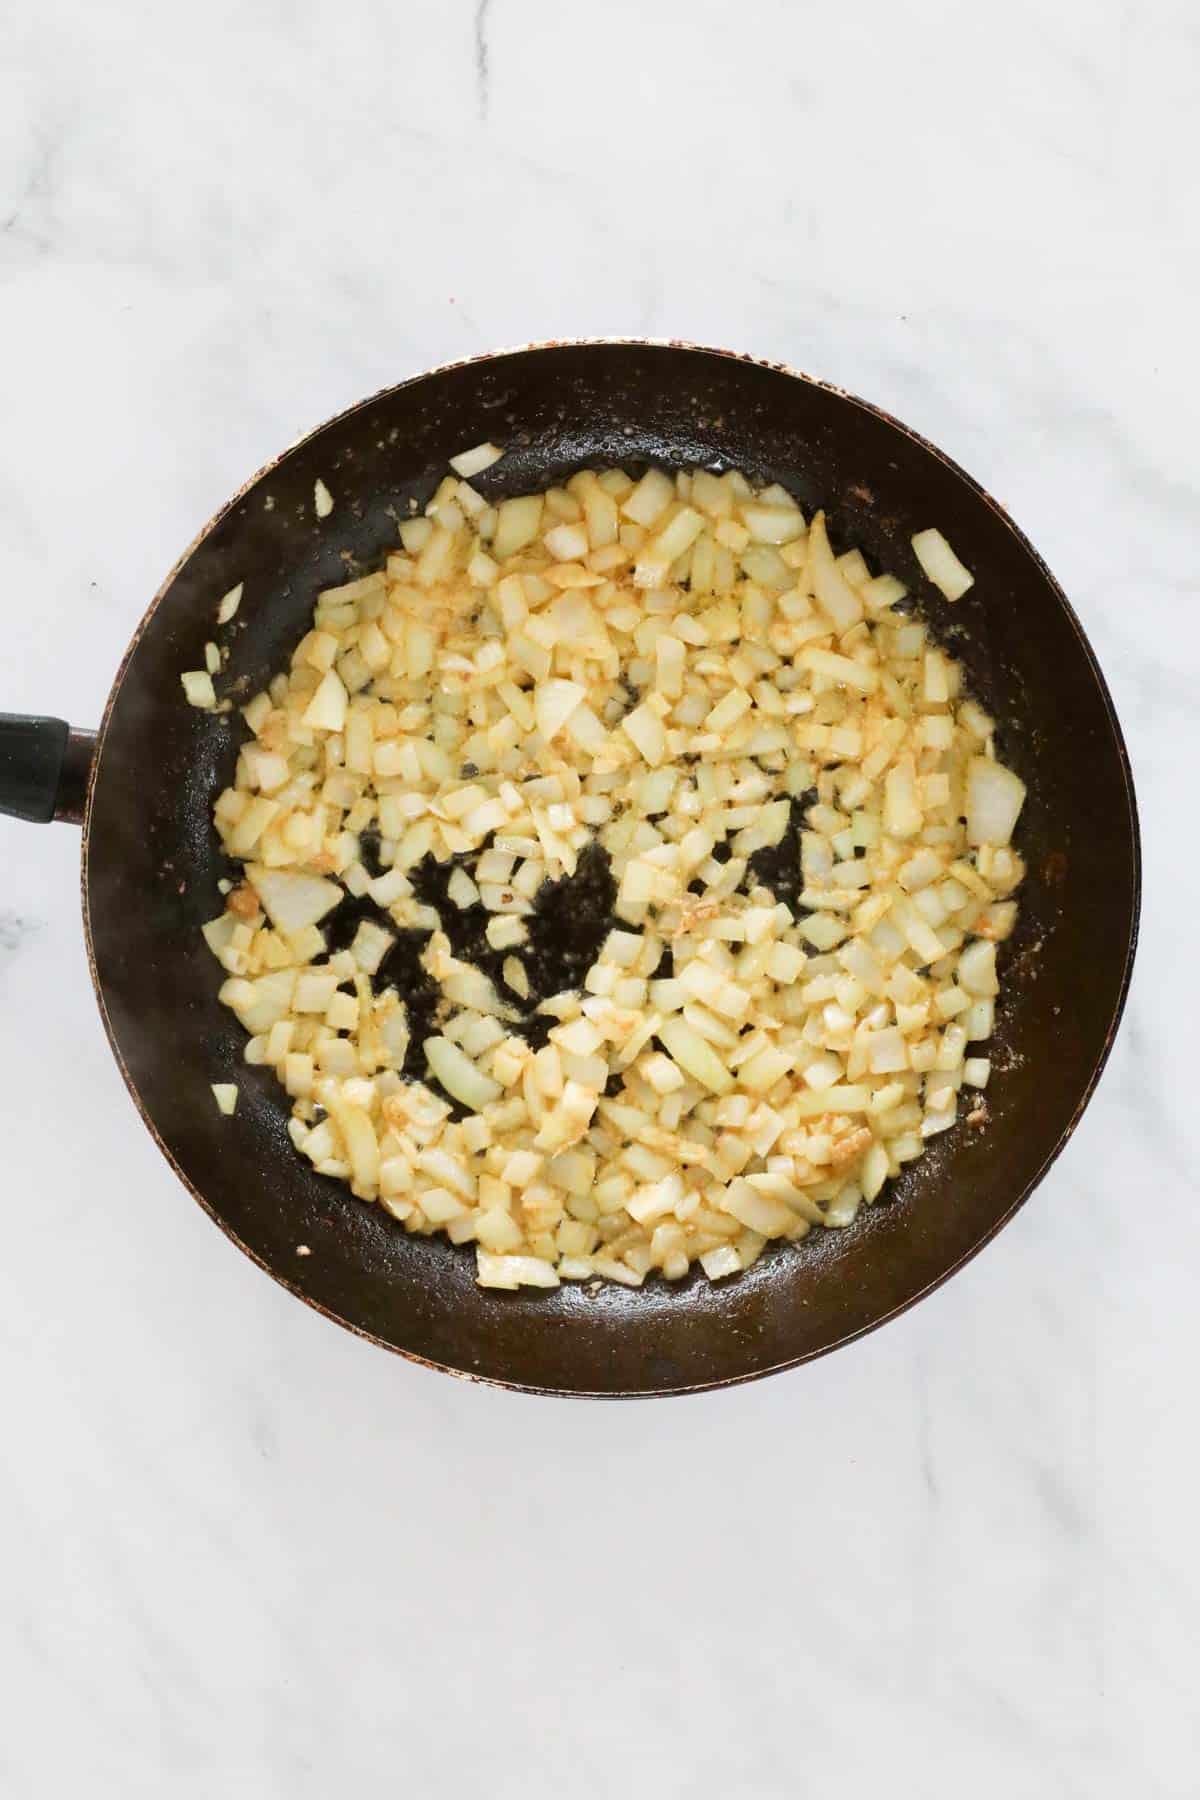 Diced onion browned in a frying pan.